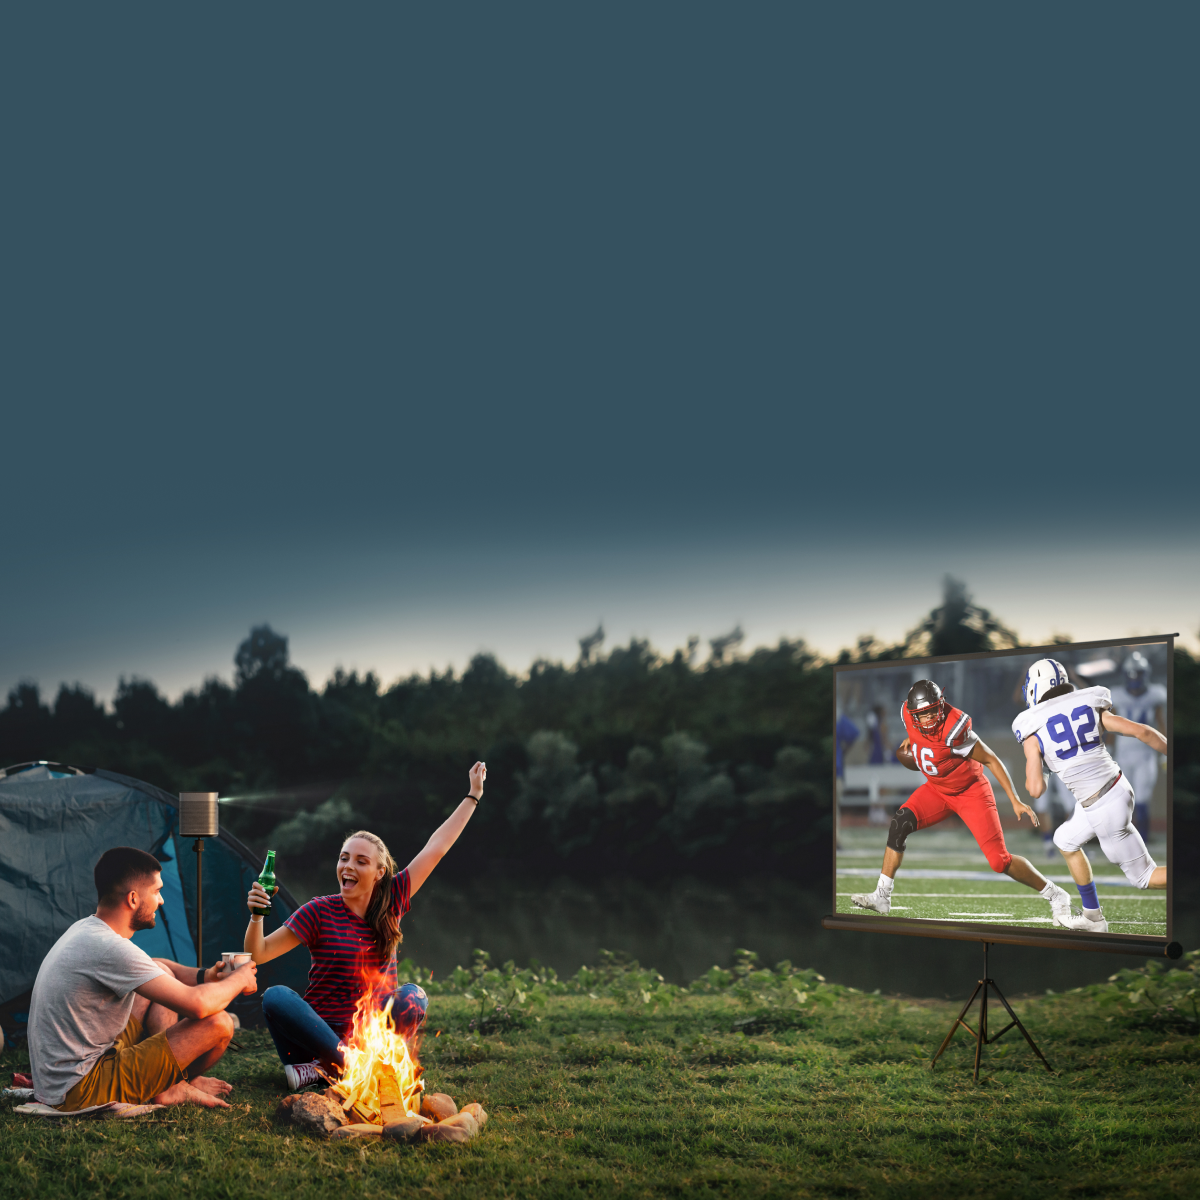 Go Big at Home! Order a Projector For Your Big Game Party